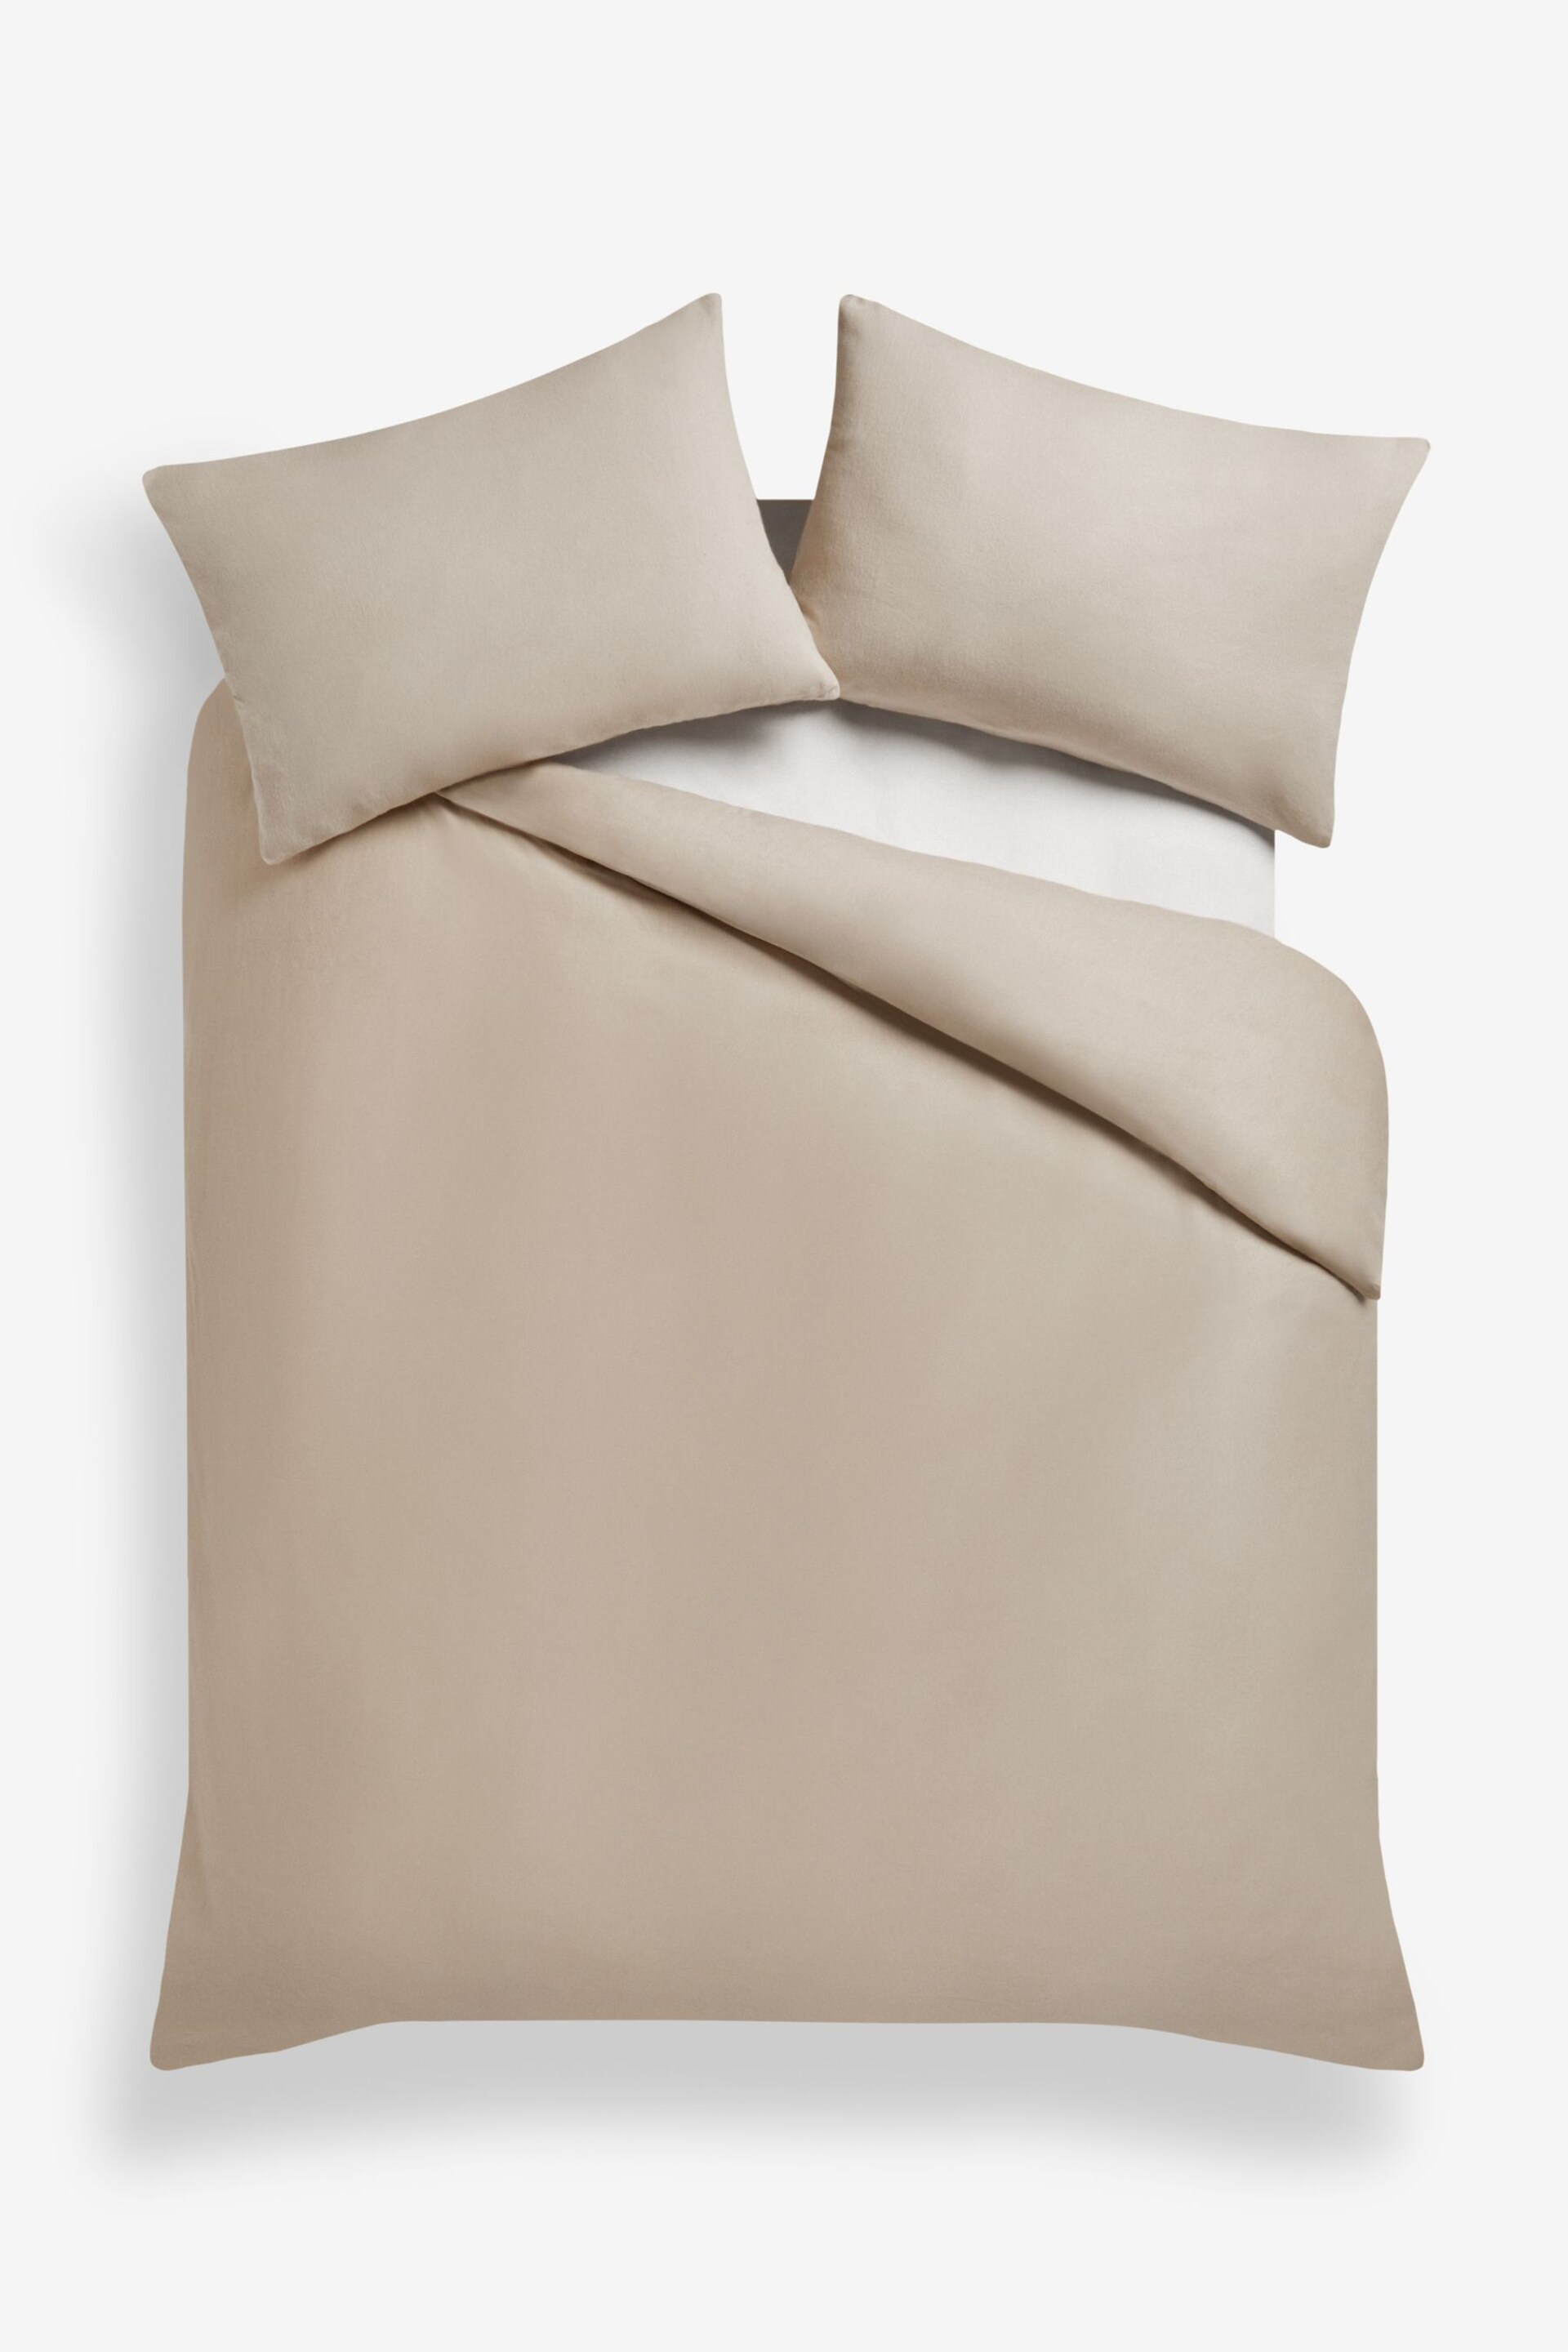 Natural 100% Cotton Supersoft Brushed Plain Duvet Cover And Pillowcase Set - Image 4 of 6